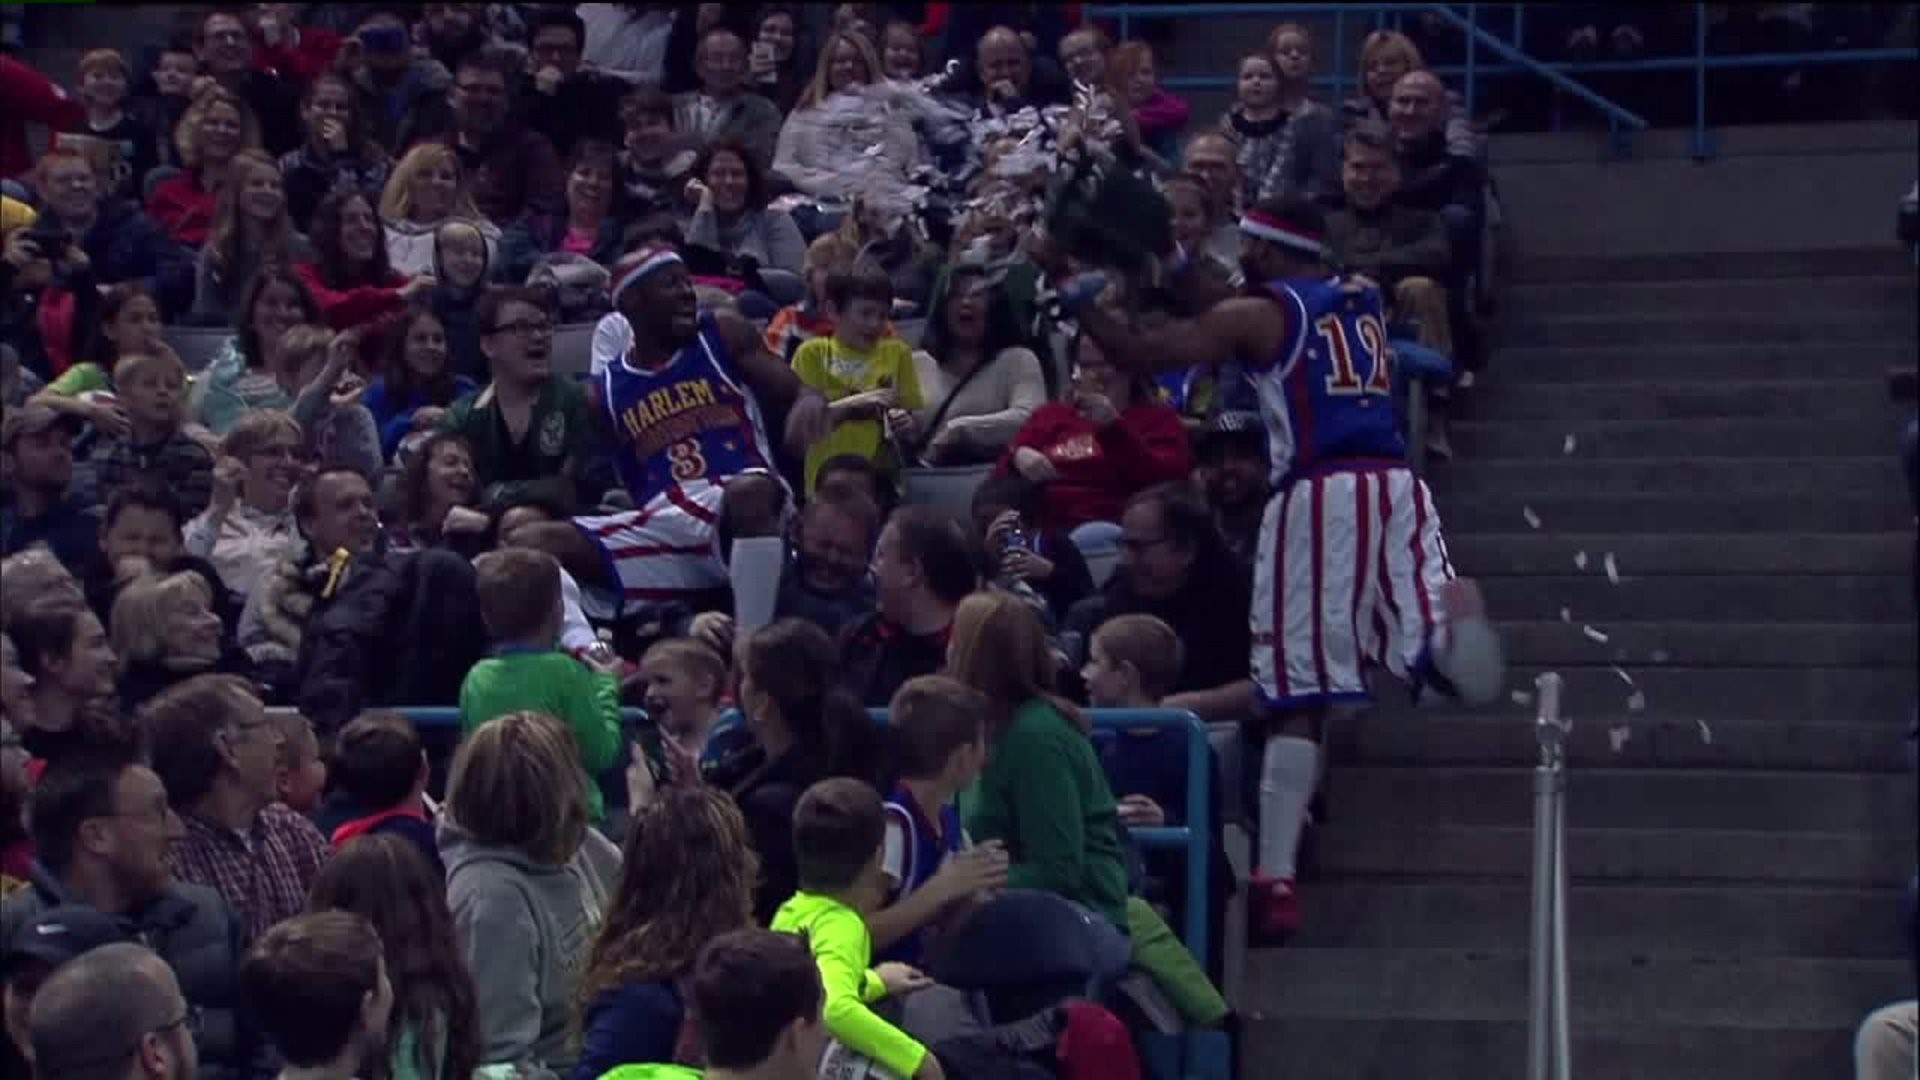 Harlem Globetrotters coming to WB